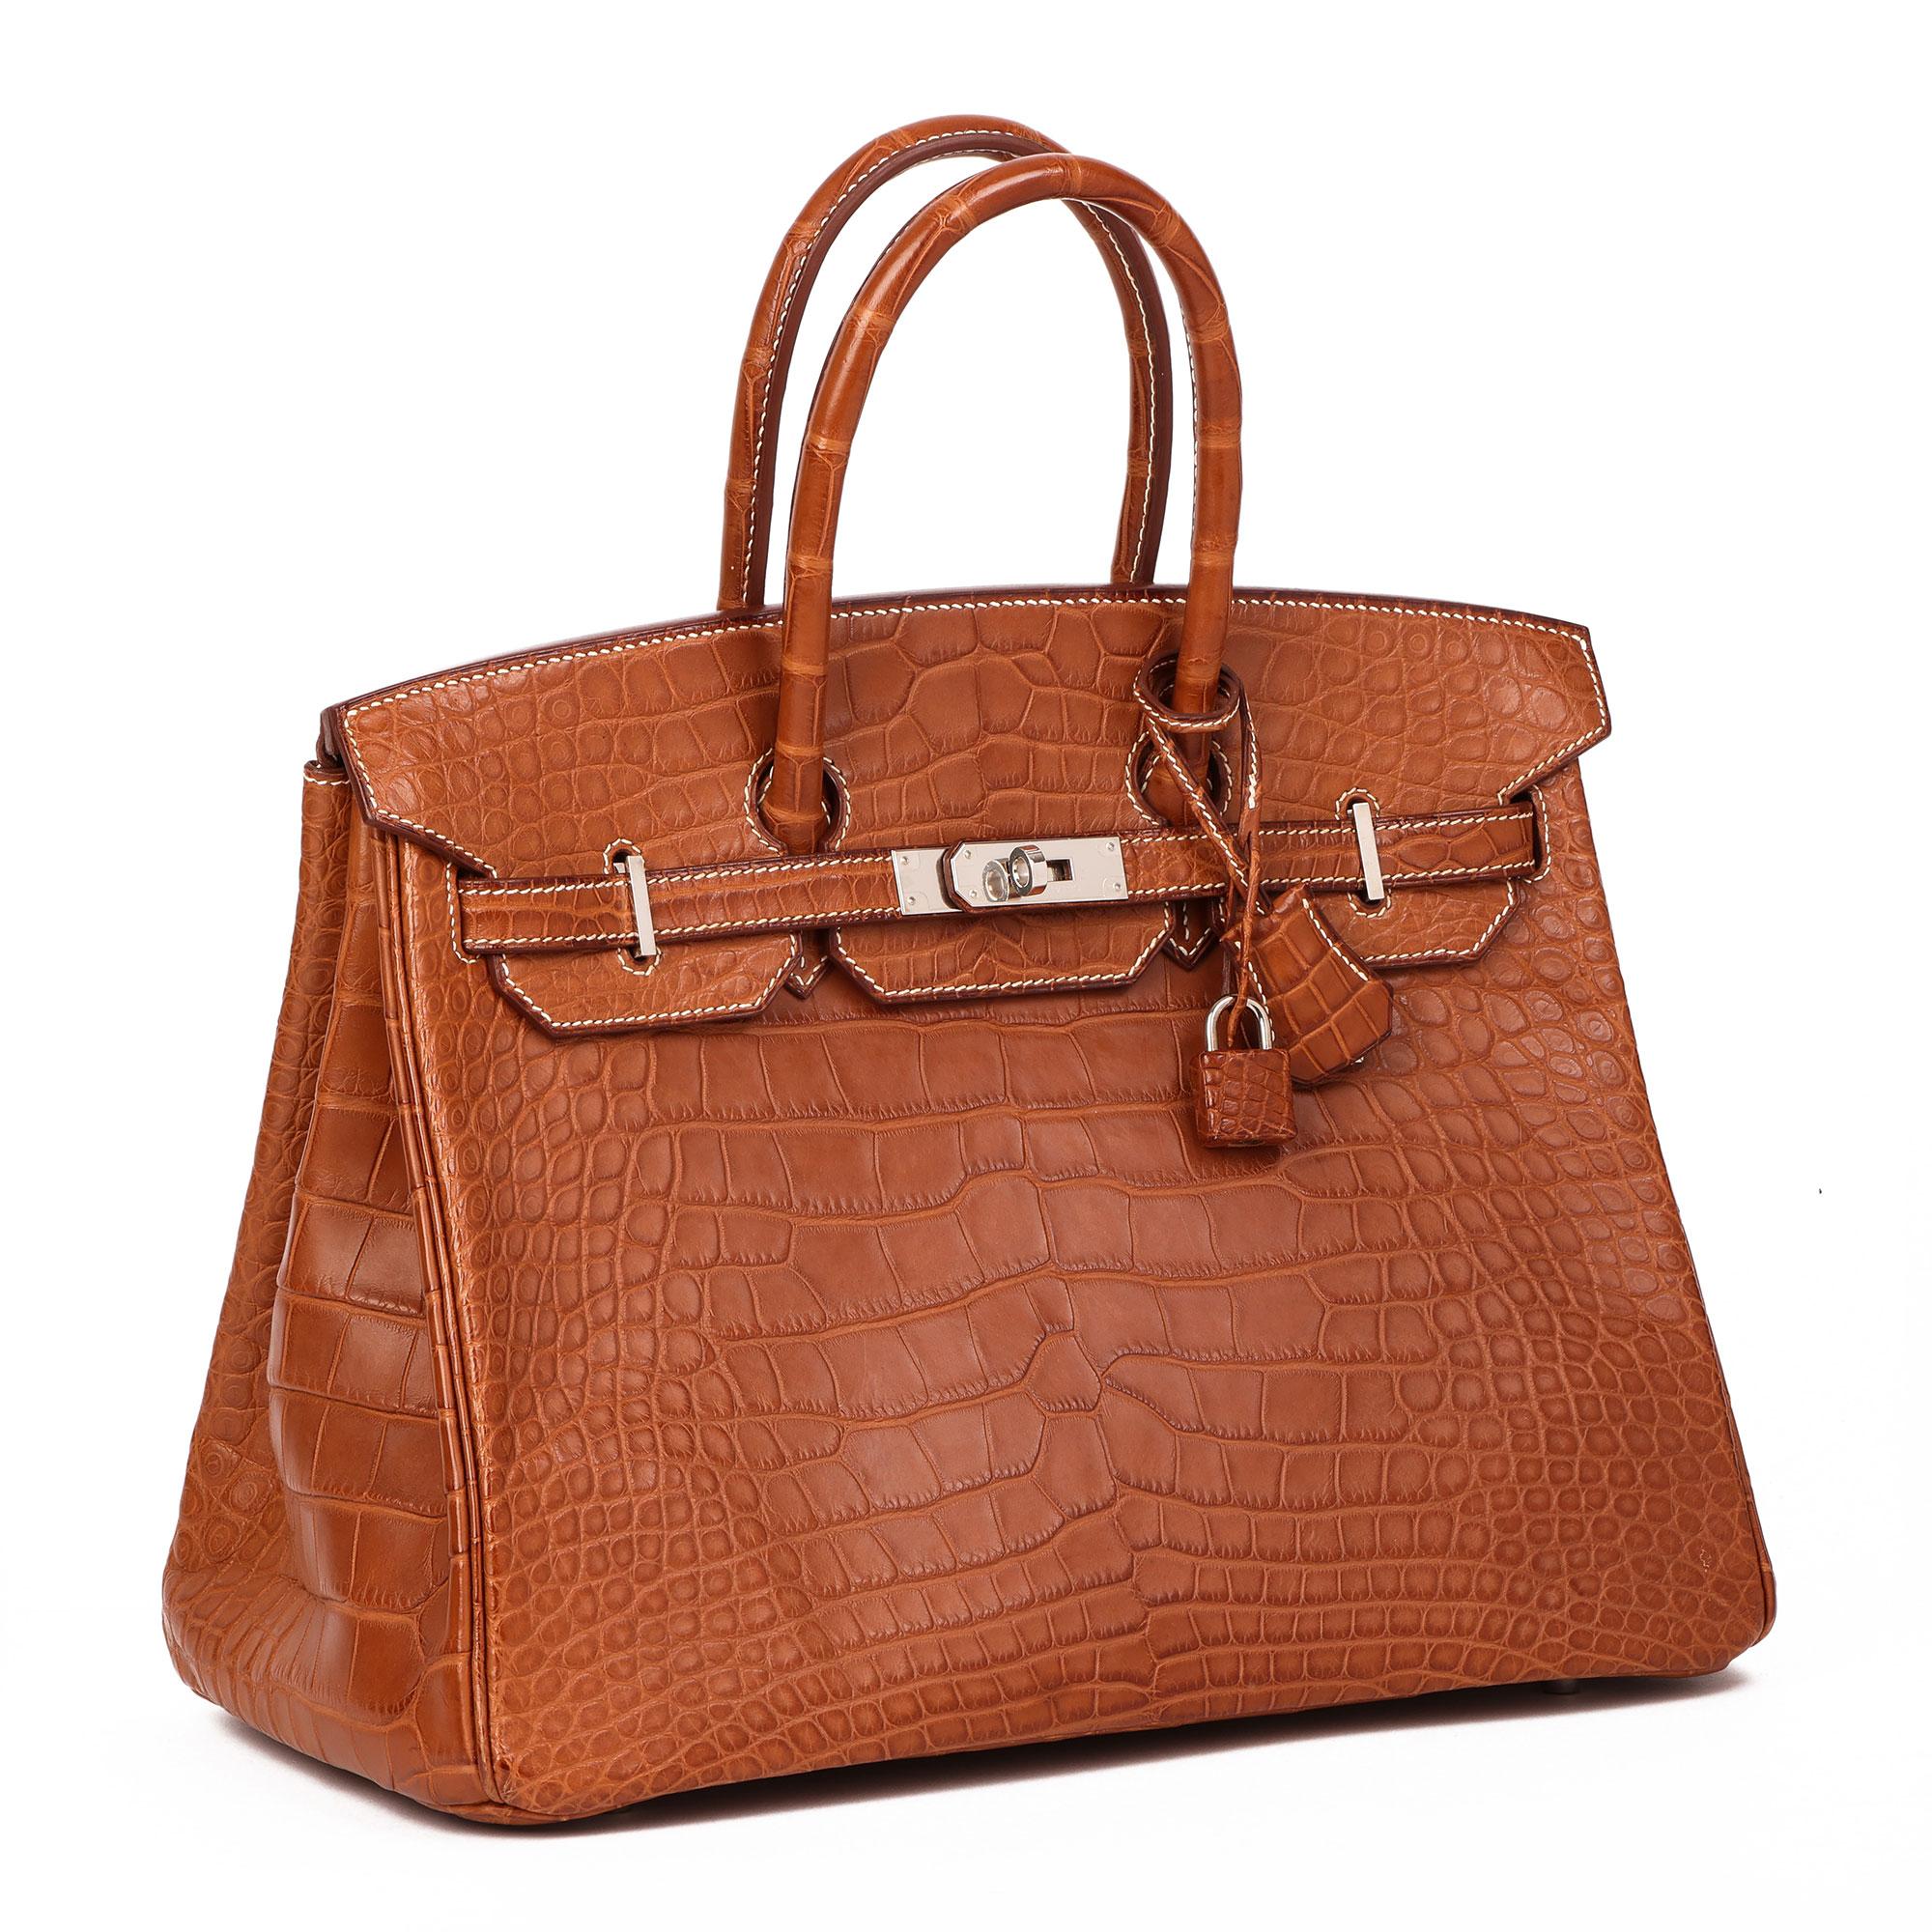 HERMÈS
Barenia Faubourg Matte Mississippiensis Alligator Leather Birkin 35cm

Xupes Reference: CB478
Serial Number: [Q]
Age (Circa): 2013
Accompanied By: Hermès Dust Bag, Box, Lock, Keys, Clochette, Rain Cover, Care Booklet, Copy of CITES, Copy of